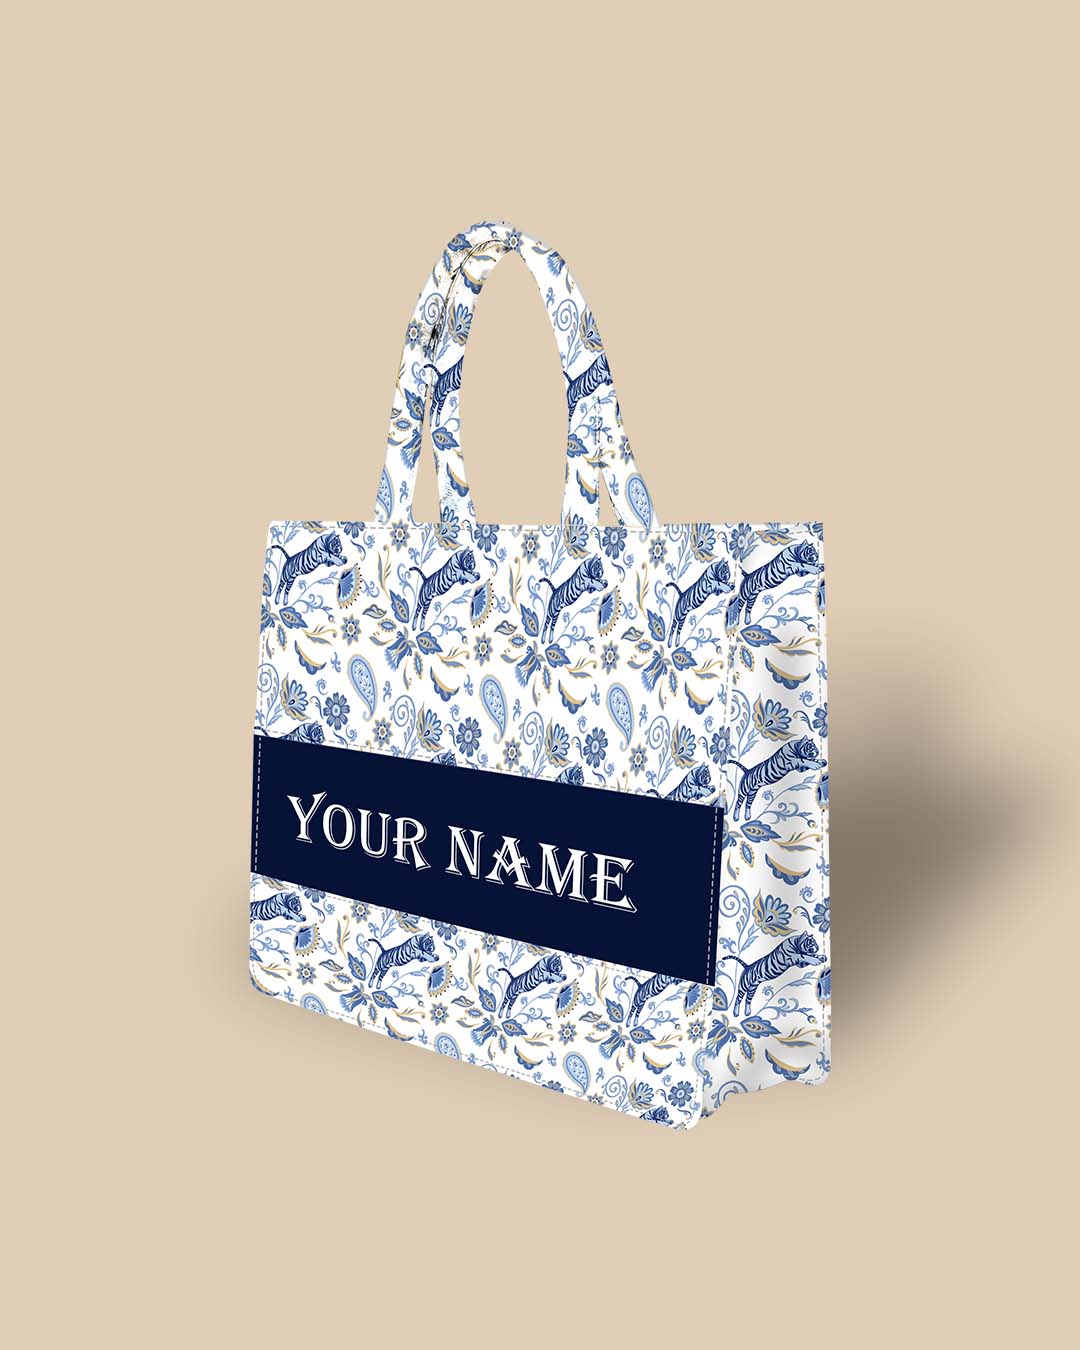 Customized Tote Bag Designed with blue Nordic tigers and abstract Asian flowers